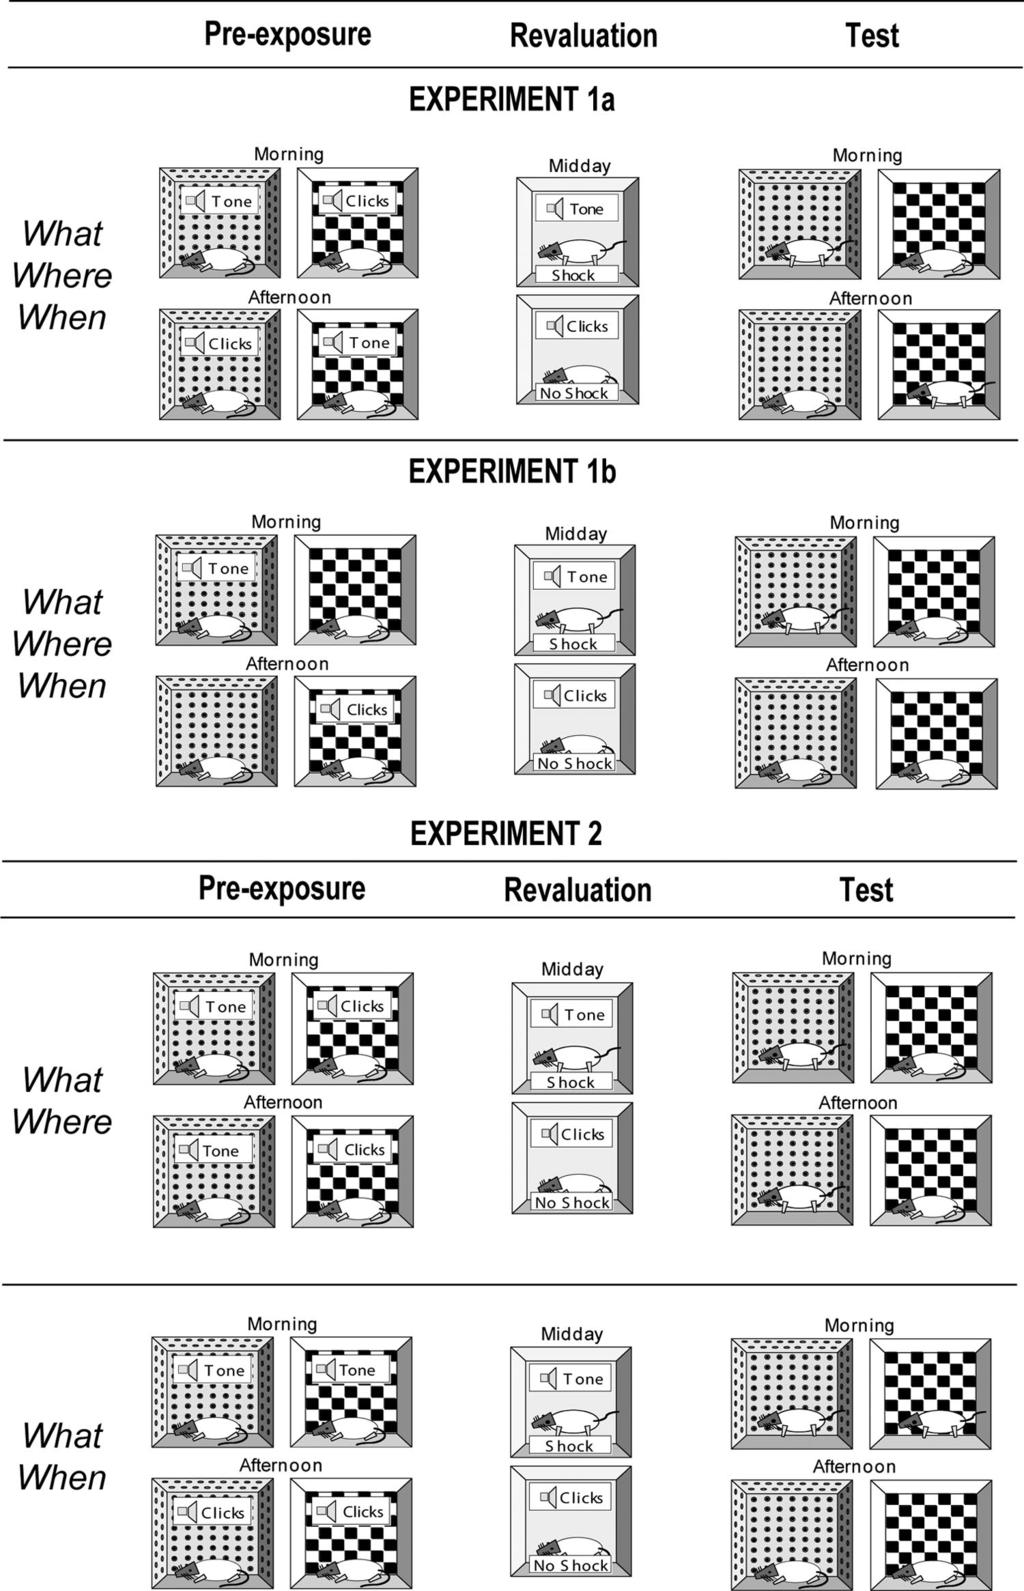 568 IORDANOVA, BURNETT, GOOD, AND HONEY Figure 1. Schematic of experimental designs used in Experiments 1A, 1B, and 2. Each experiment involved three stages (left to right).